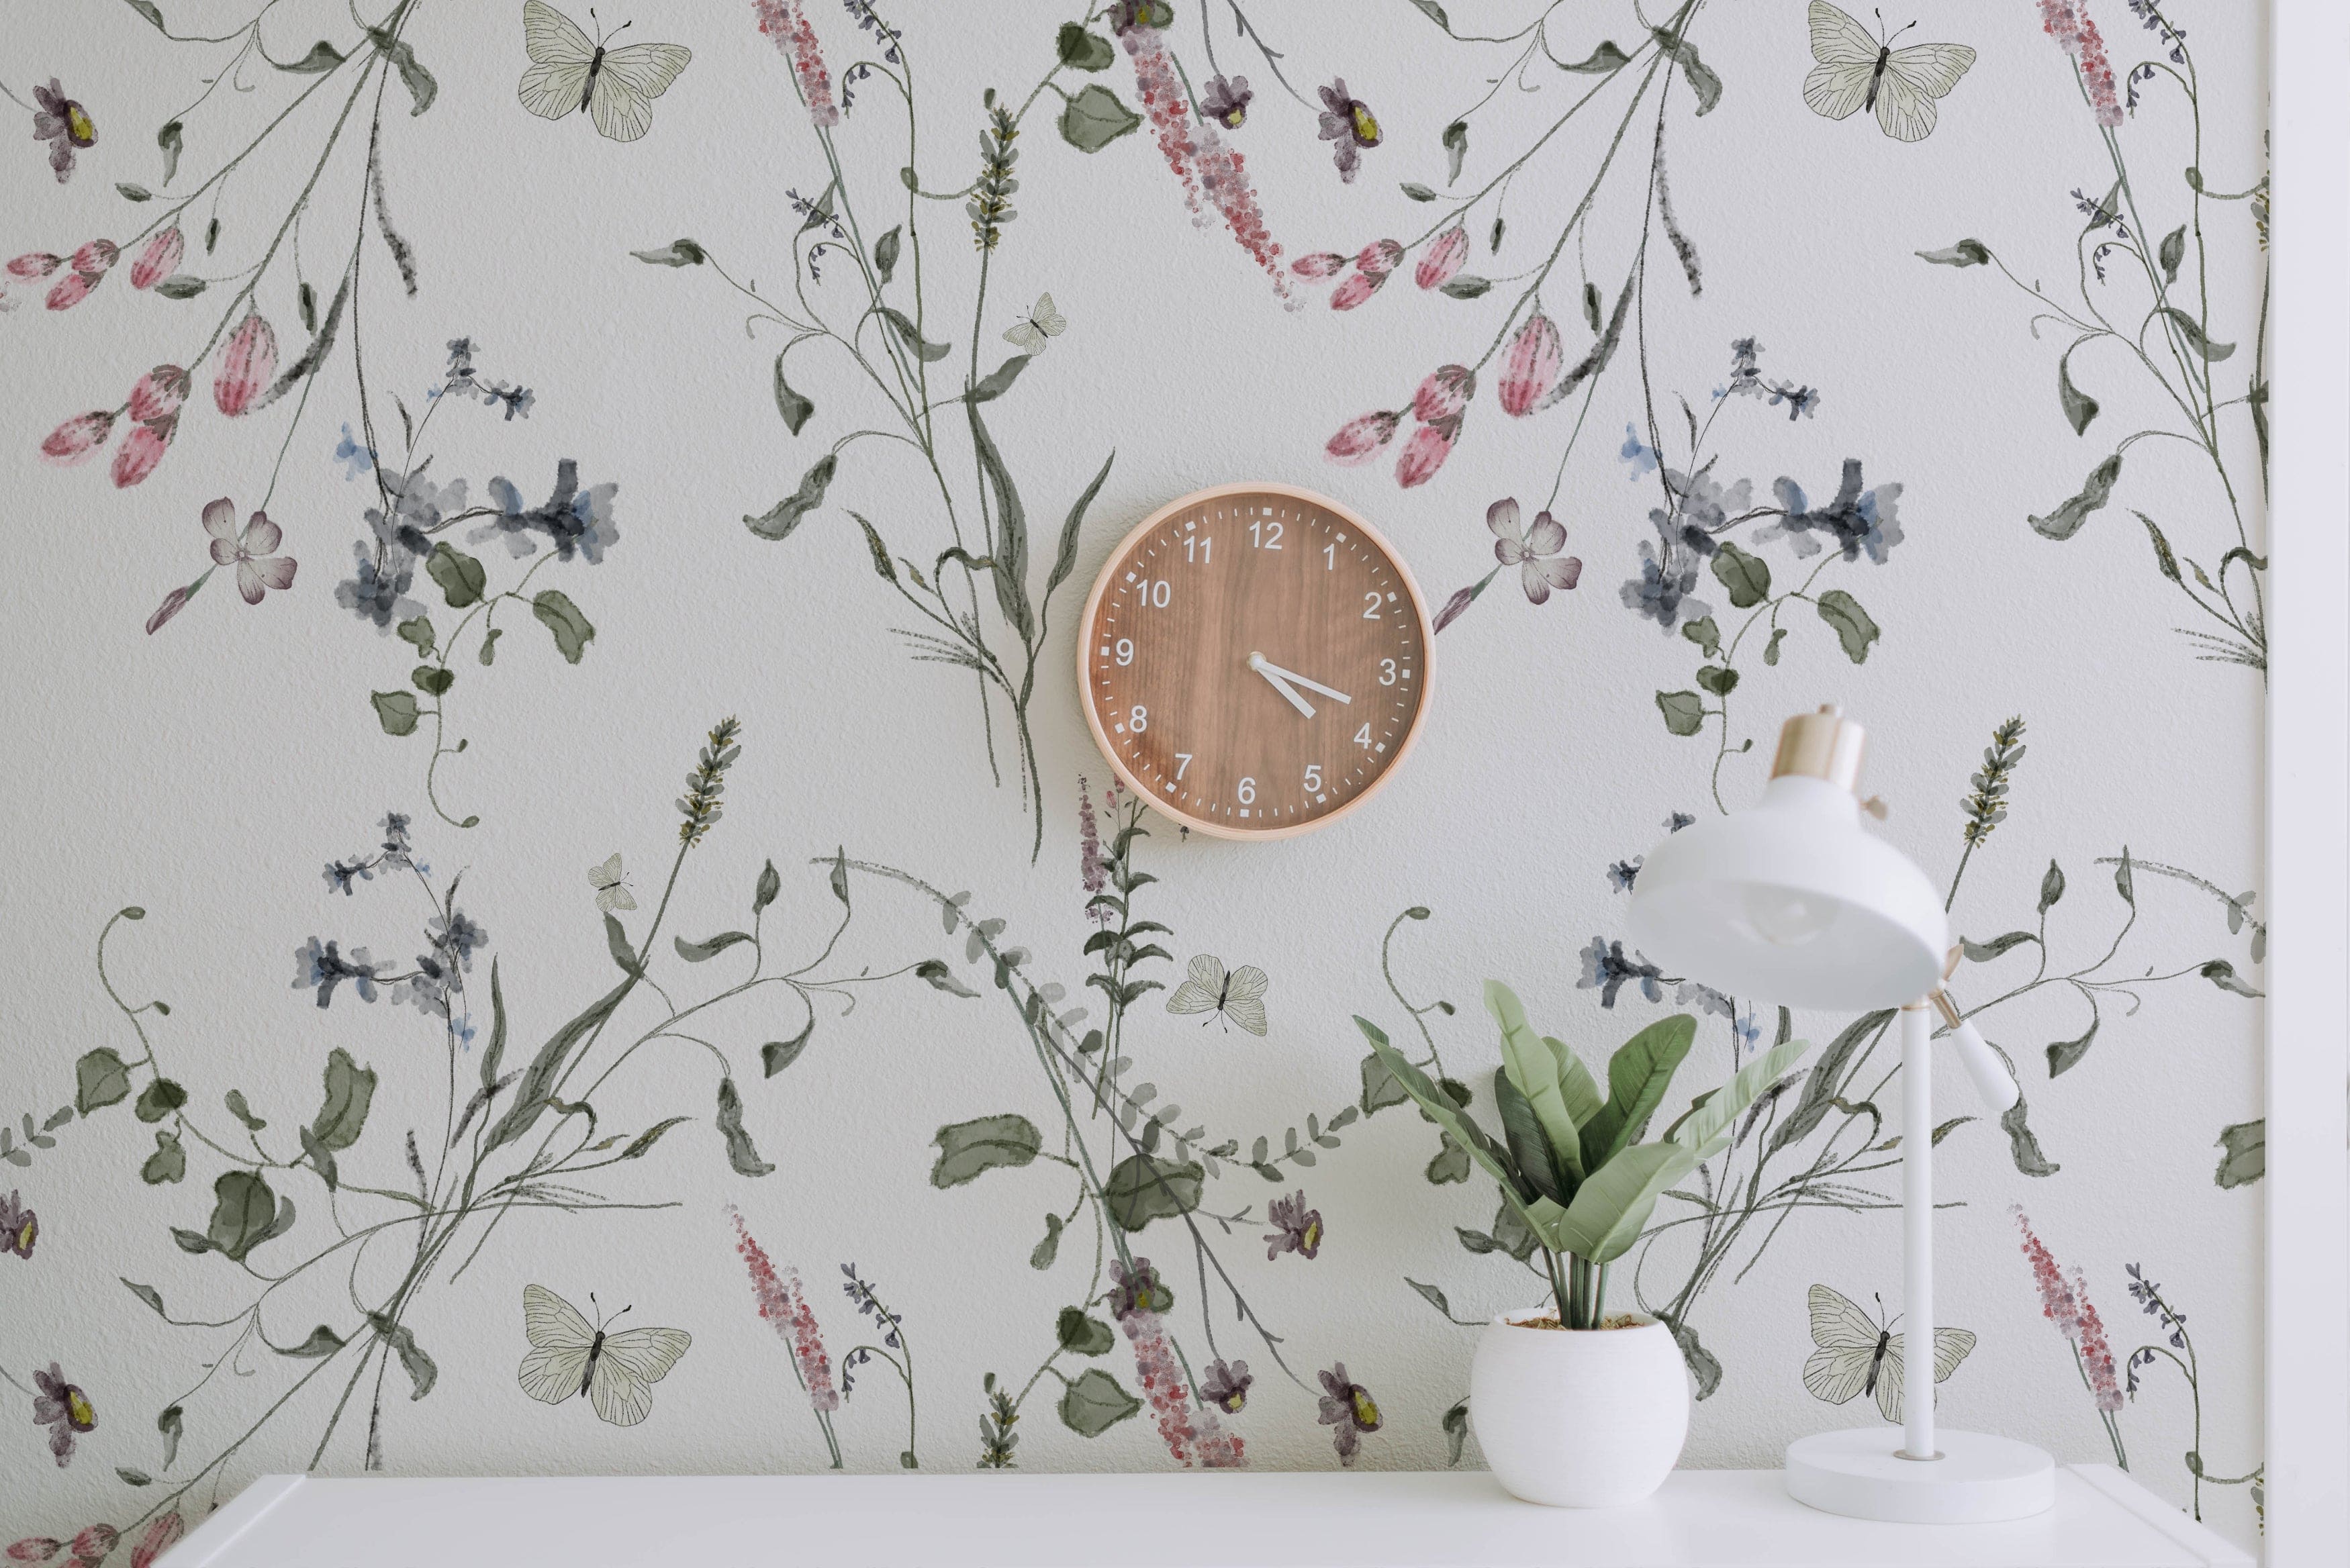 A serene office space enhanced by the Lovely Botanicals Wallpaper, featuring delicate botanical illustrations with flowers and butterflies in soft pastel colors. A wooden clock and white lamp on a sleek desk complement the gentle nature theme.